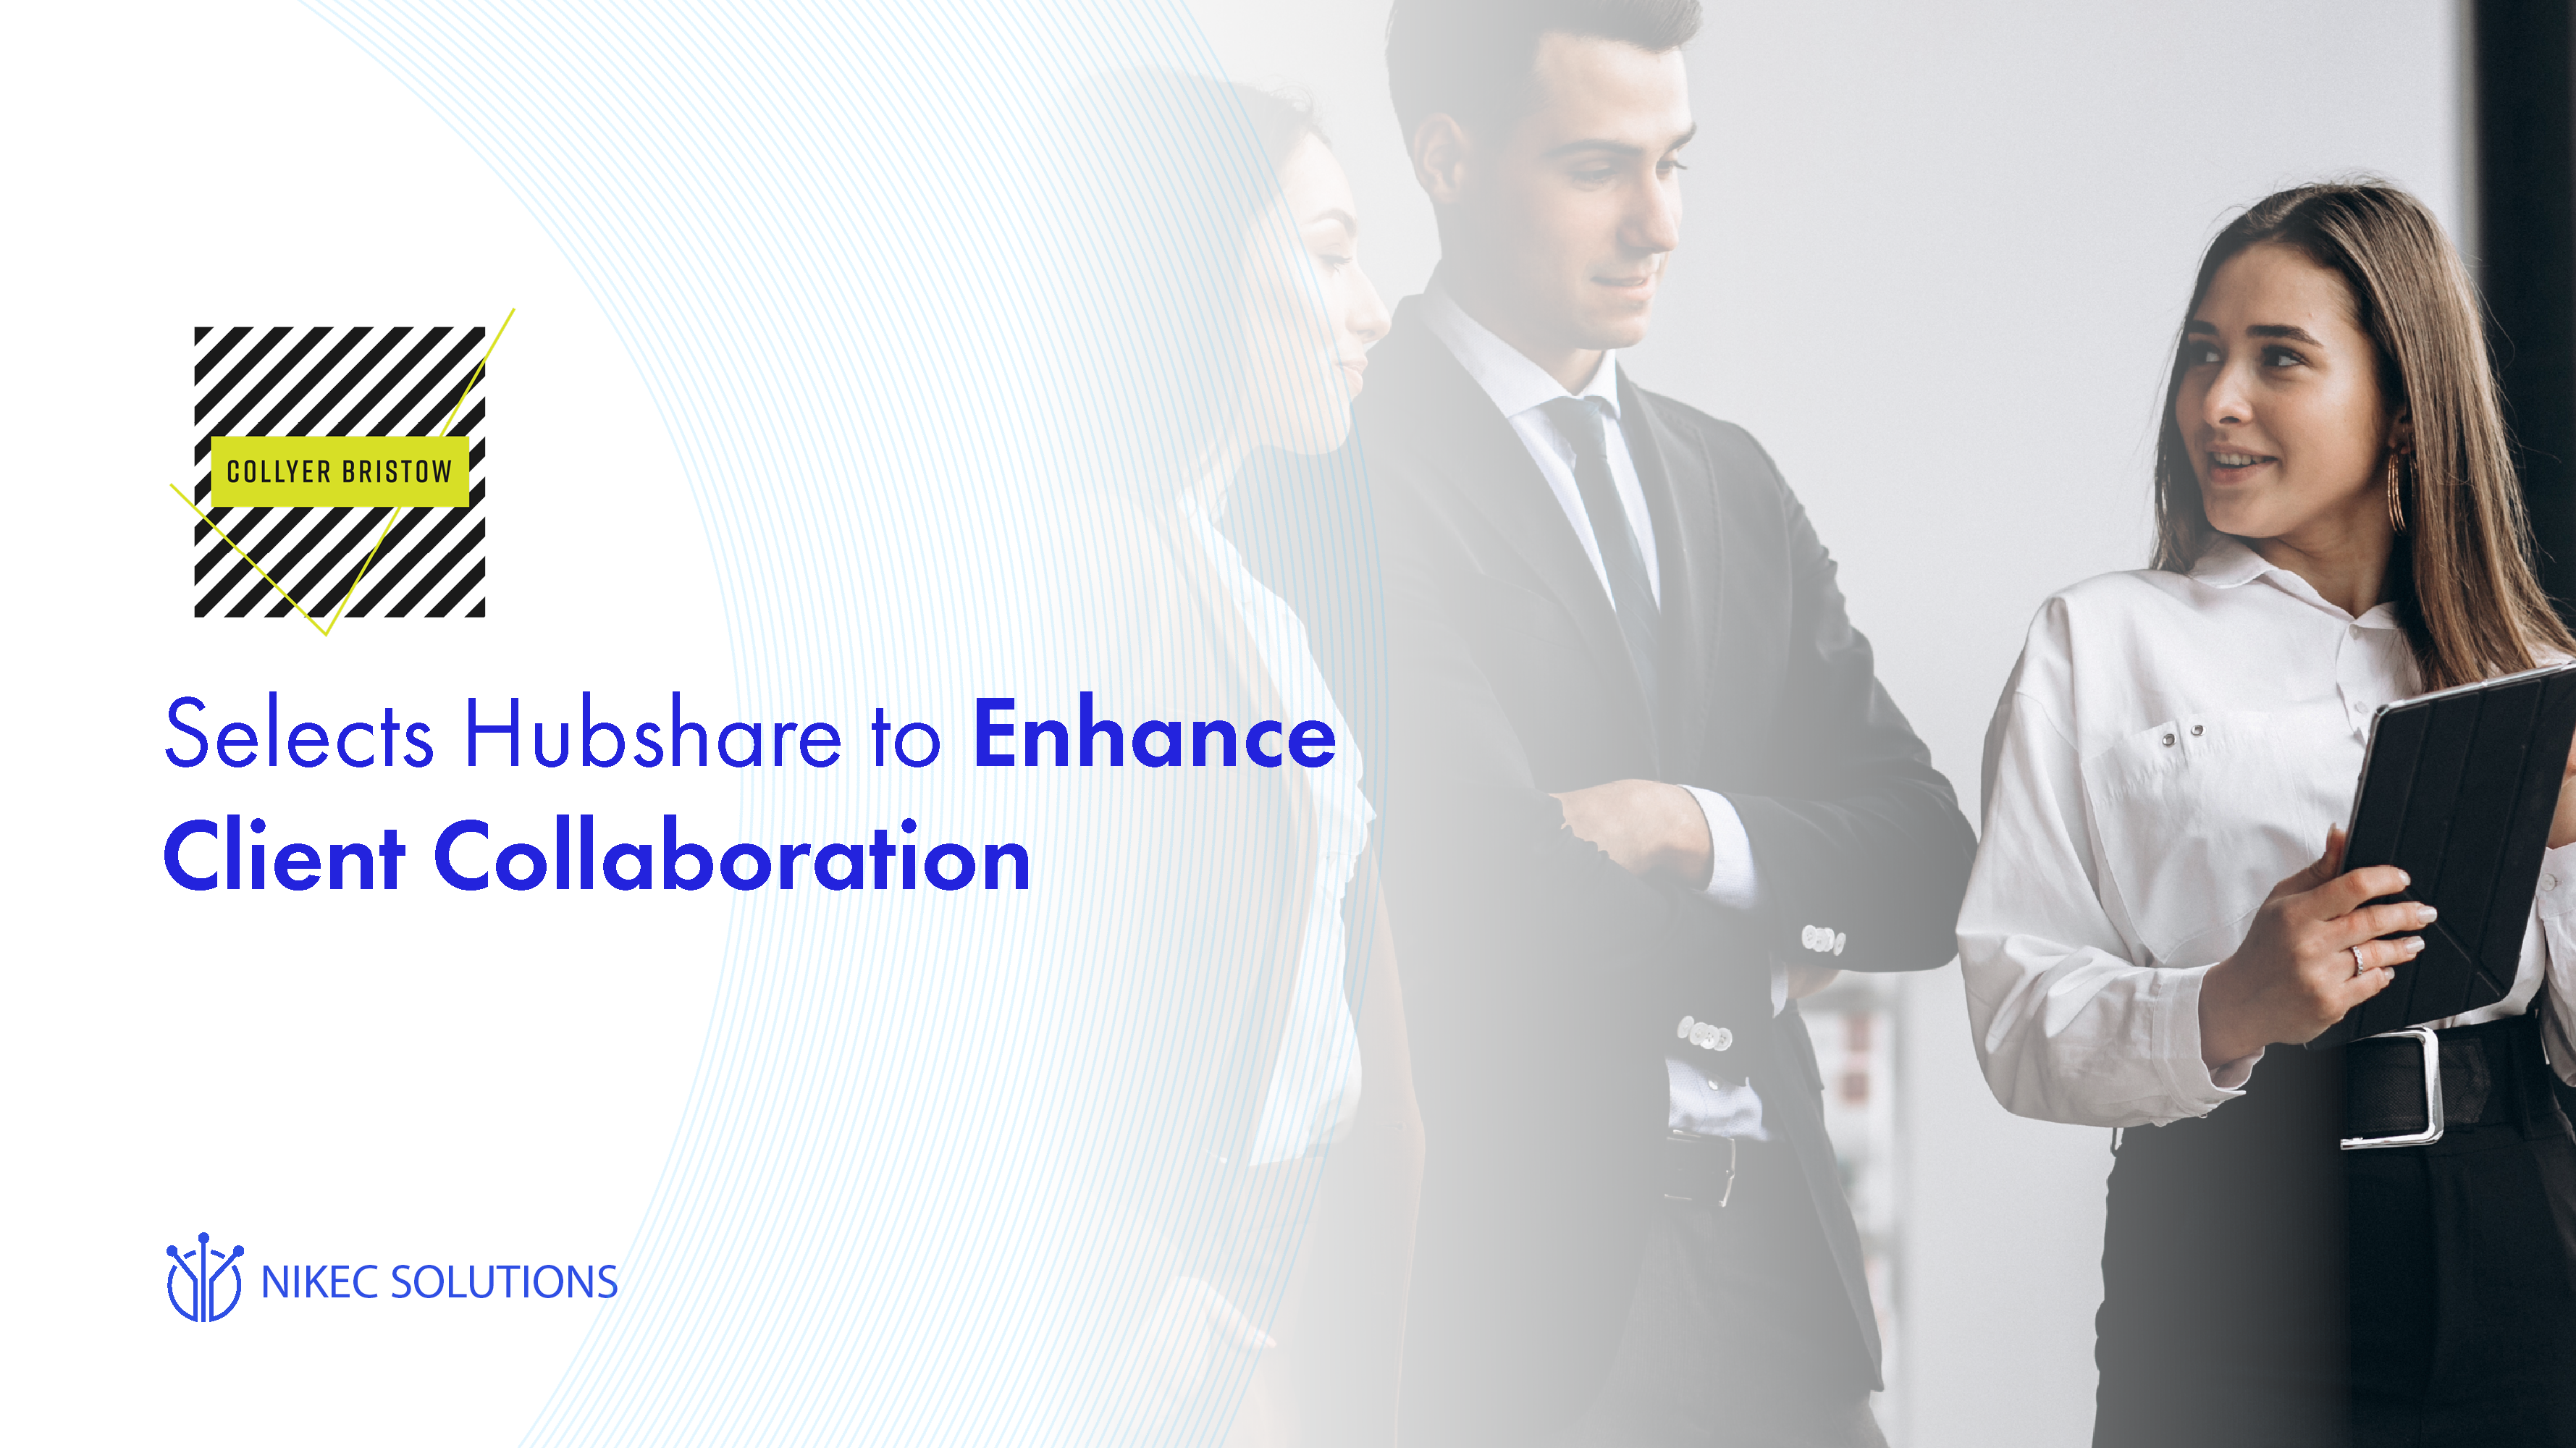 Collyer Bristow LLP have selected Hubshare from Nikec Solutions to enhance client collaboration with a collaboration portal.